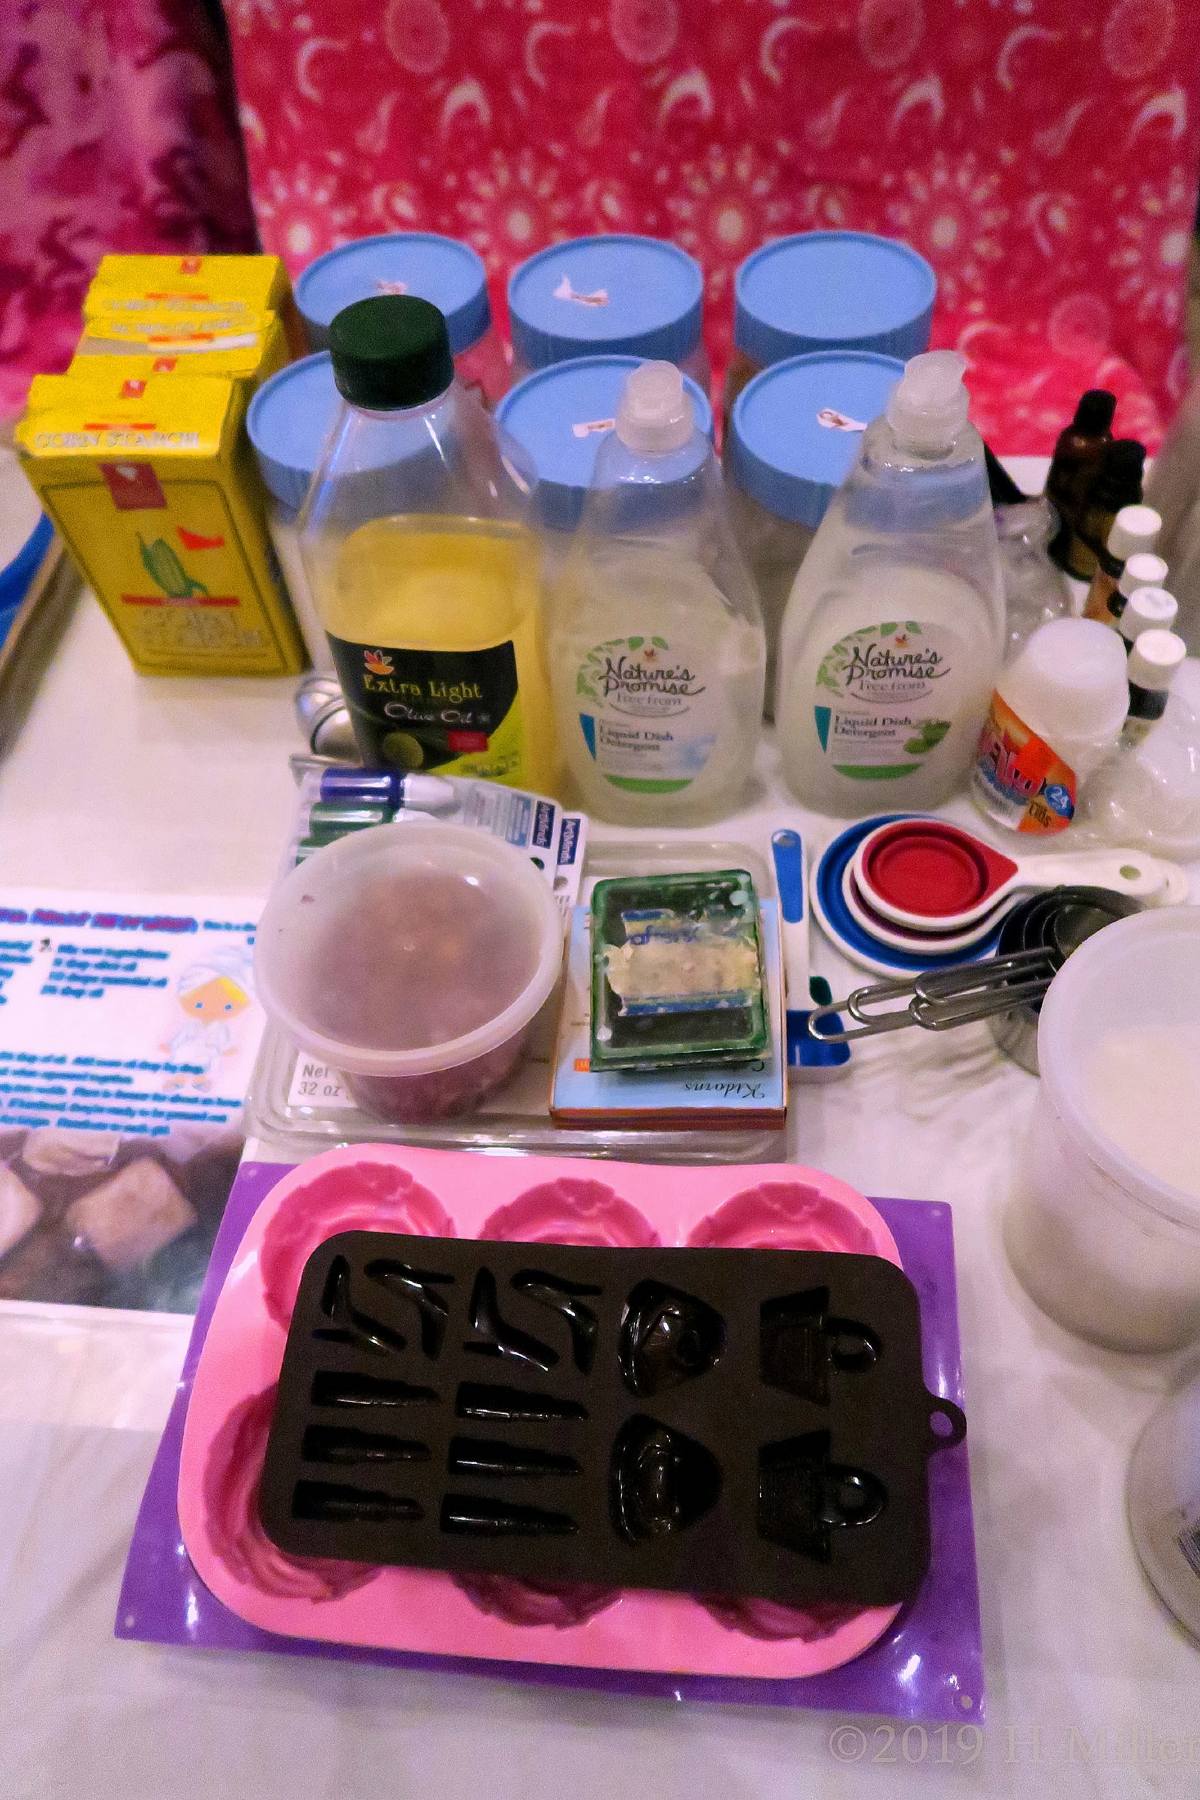 Are You Ready To Craft Yet! Kids Craft Supplies For Soap, Bubble Bath, Bath Bombs, And More At The Spa For Girls! 